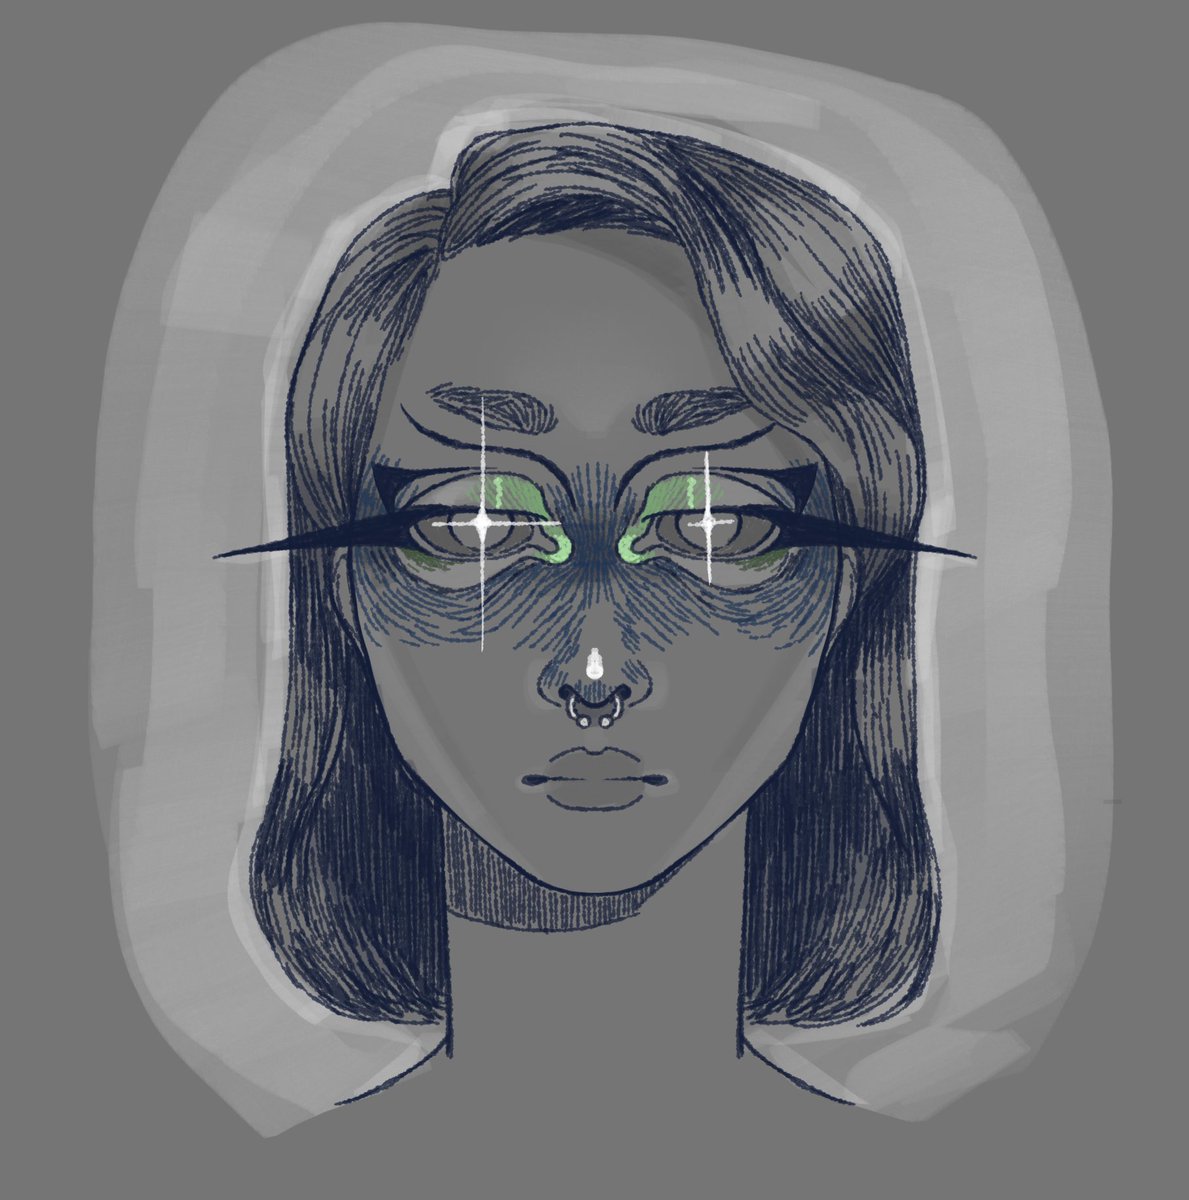 Self Portrait (going to try and post more art here) #originalart #selfportrait